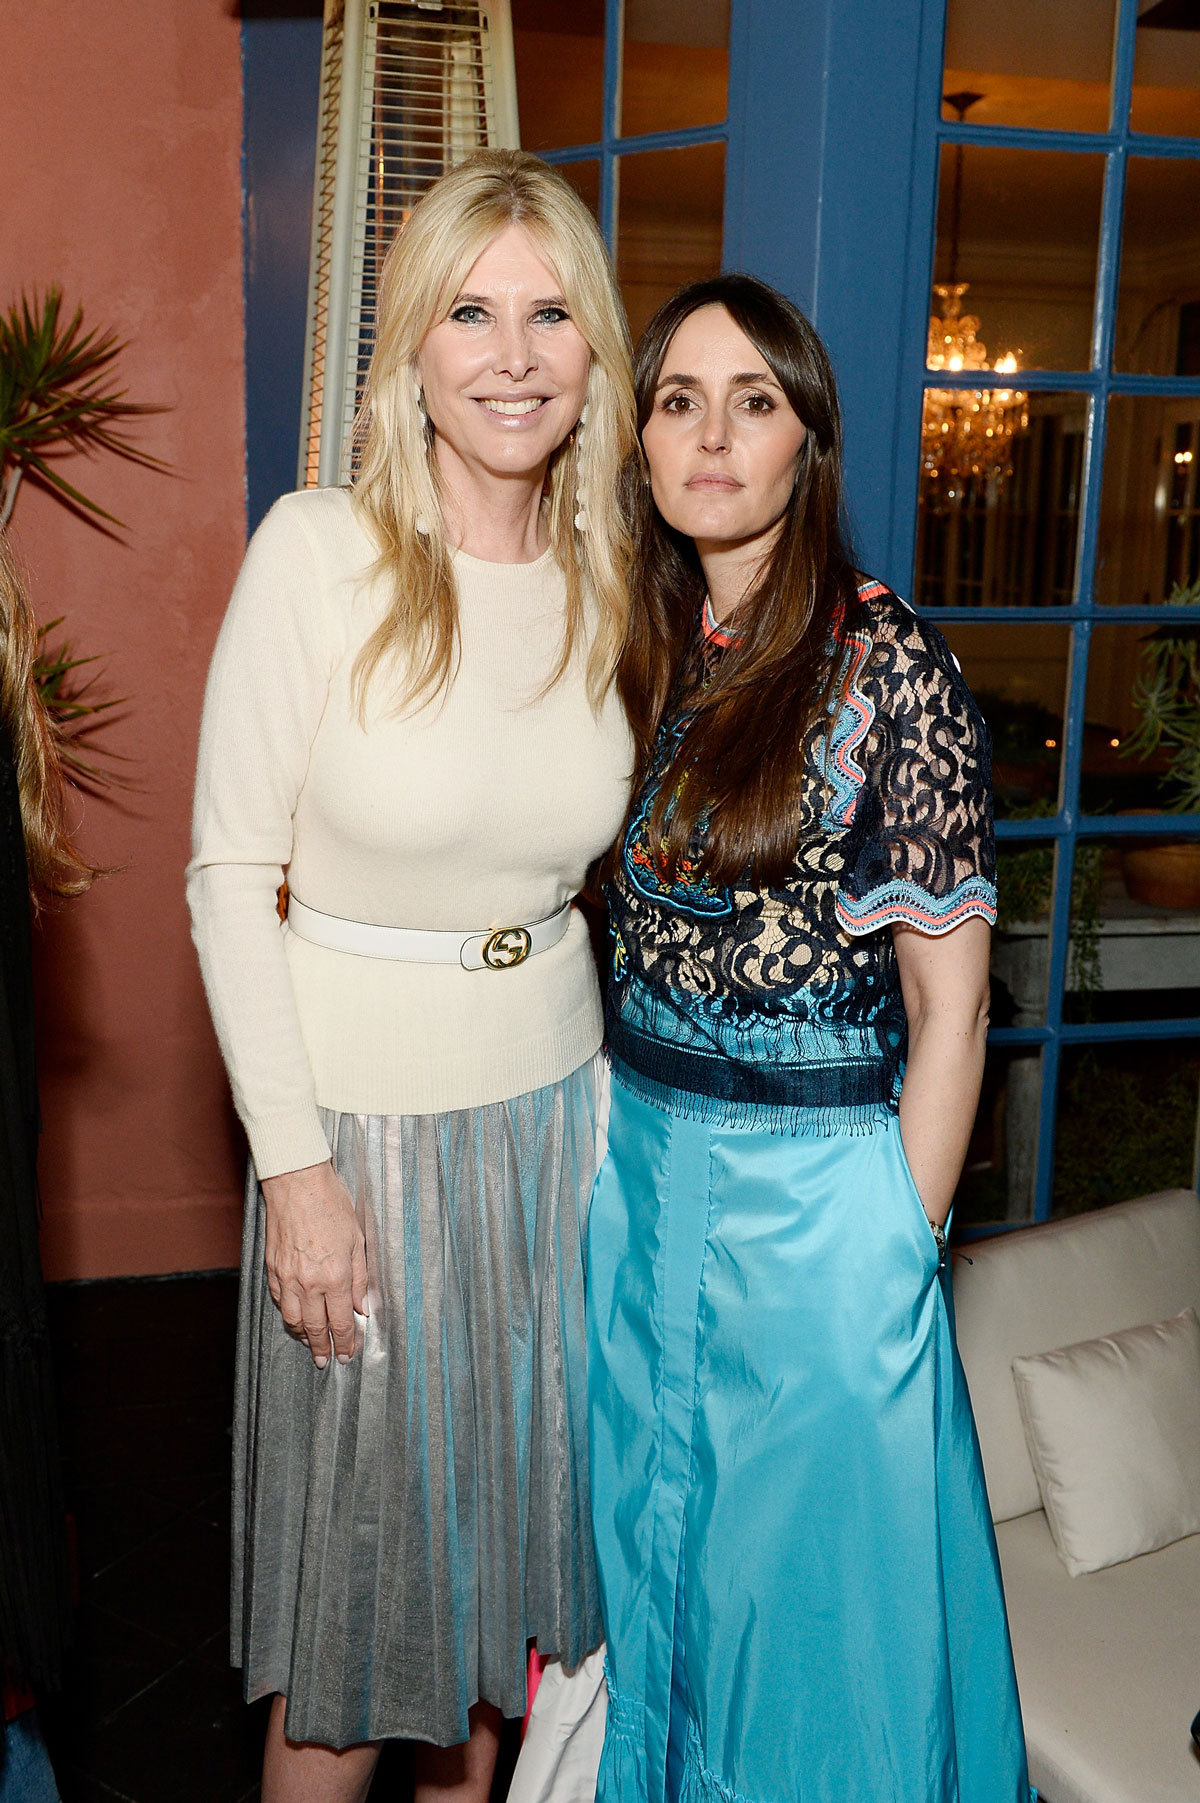 Irena Medavoy and Tania Fares celebrate the launch of London Uprising Fifty Fashion Designers One City on April 18, 2017 in Los Angeles, California. (Photo by Stefanie Keenan/Getty Images for Tania Fares)